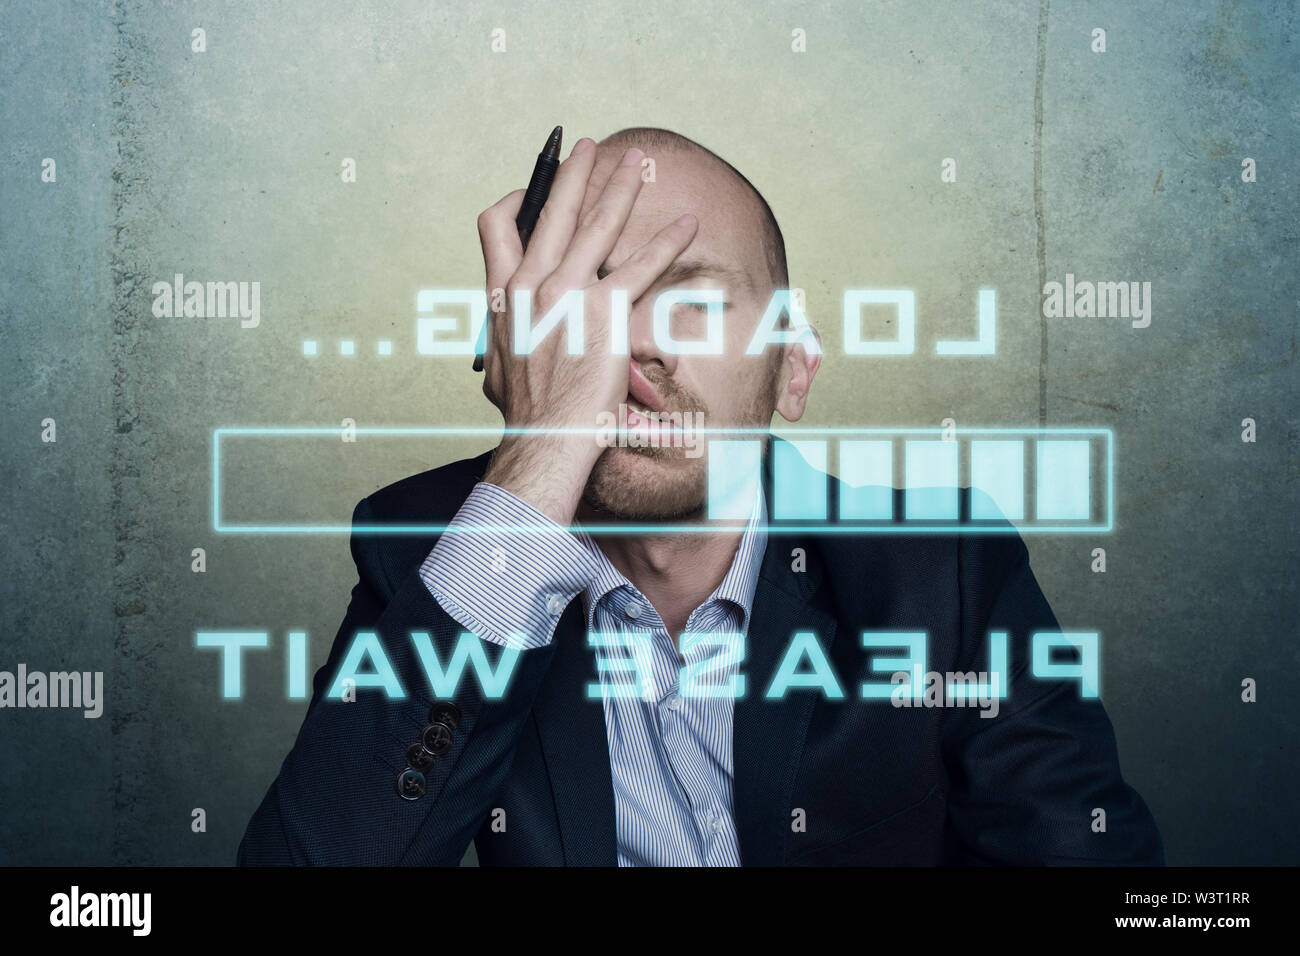 businessman or office worker waits bored and long on his slow computer or internet connection, displaying a loading bar and a message Stock Photo